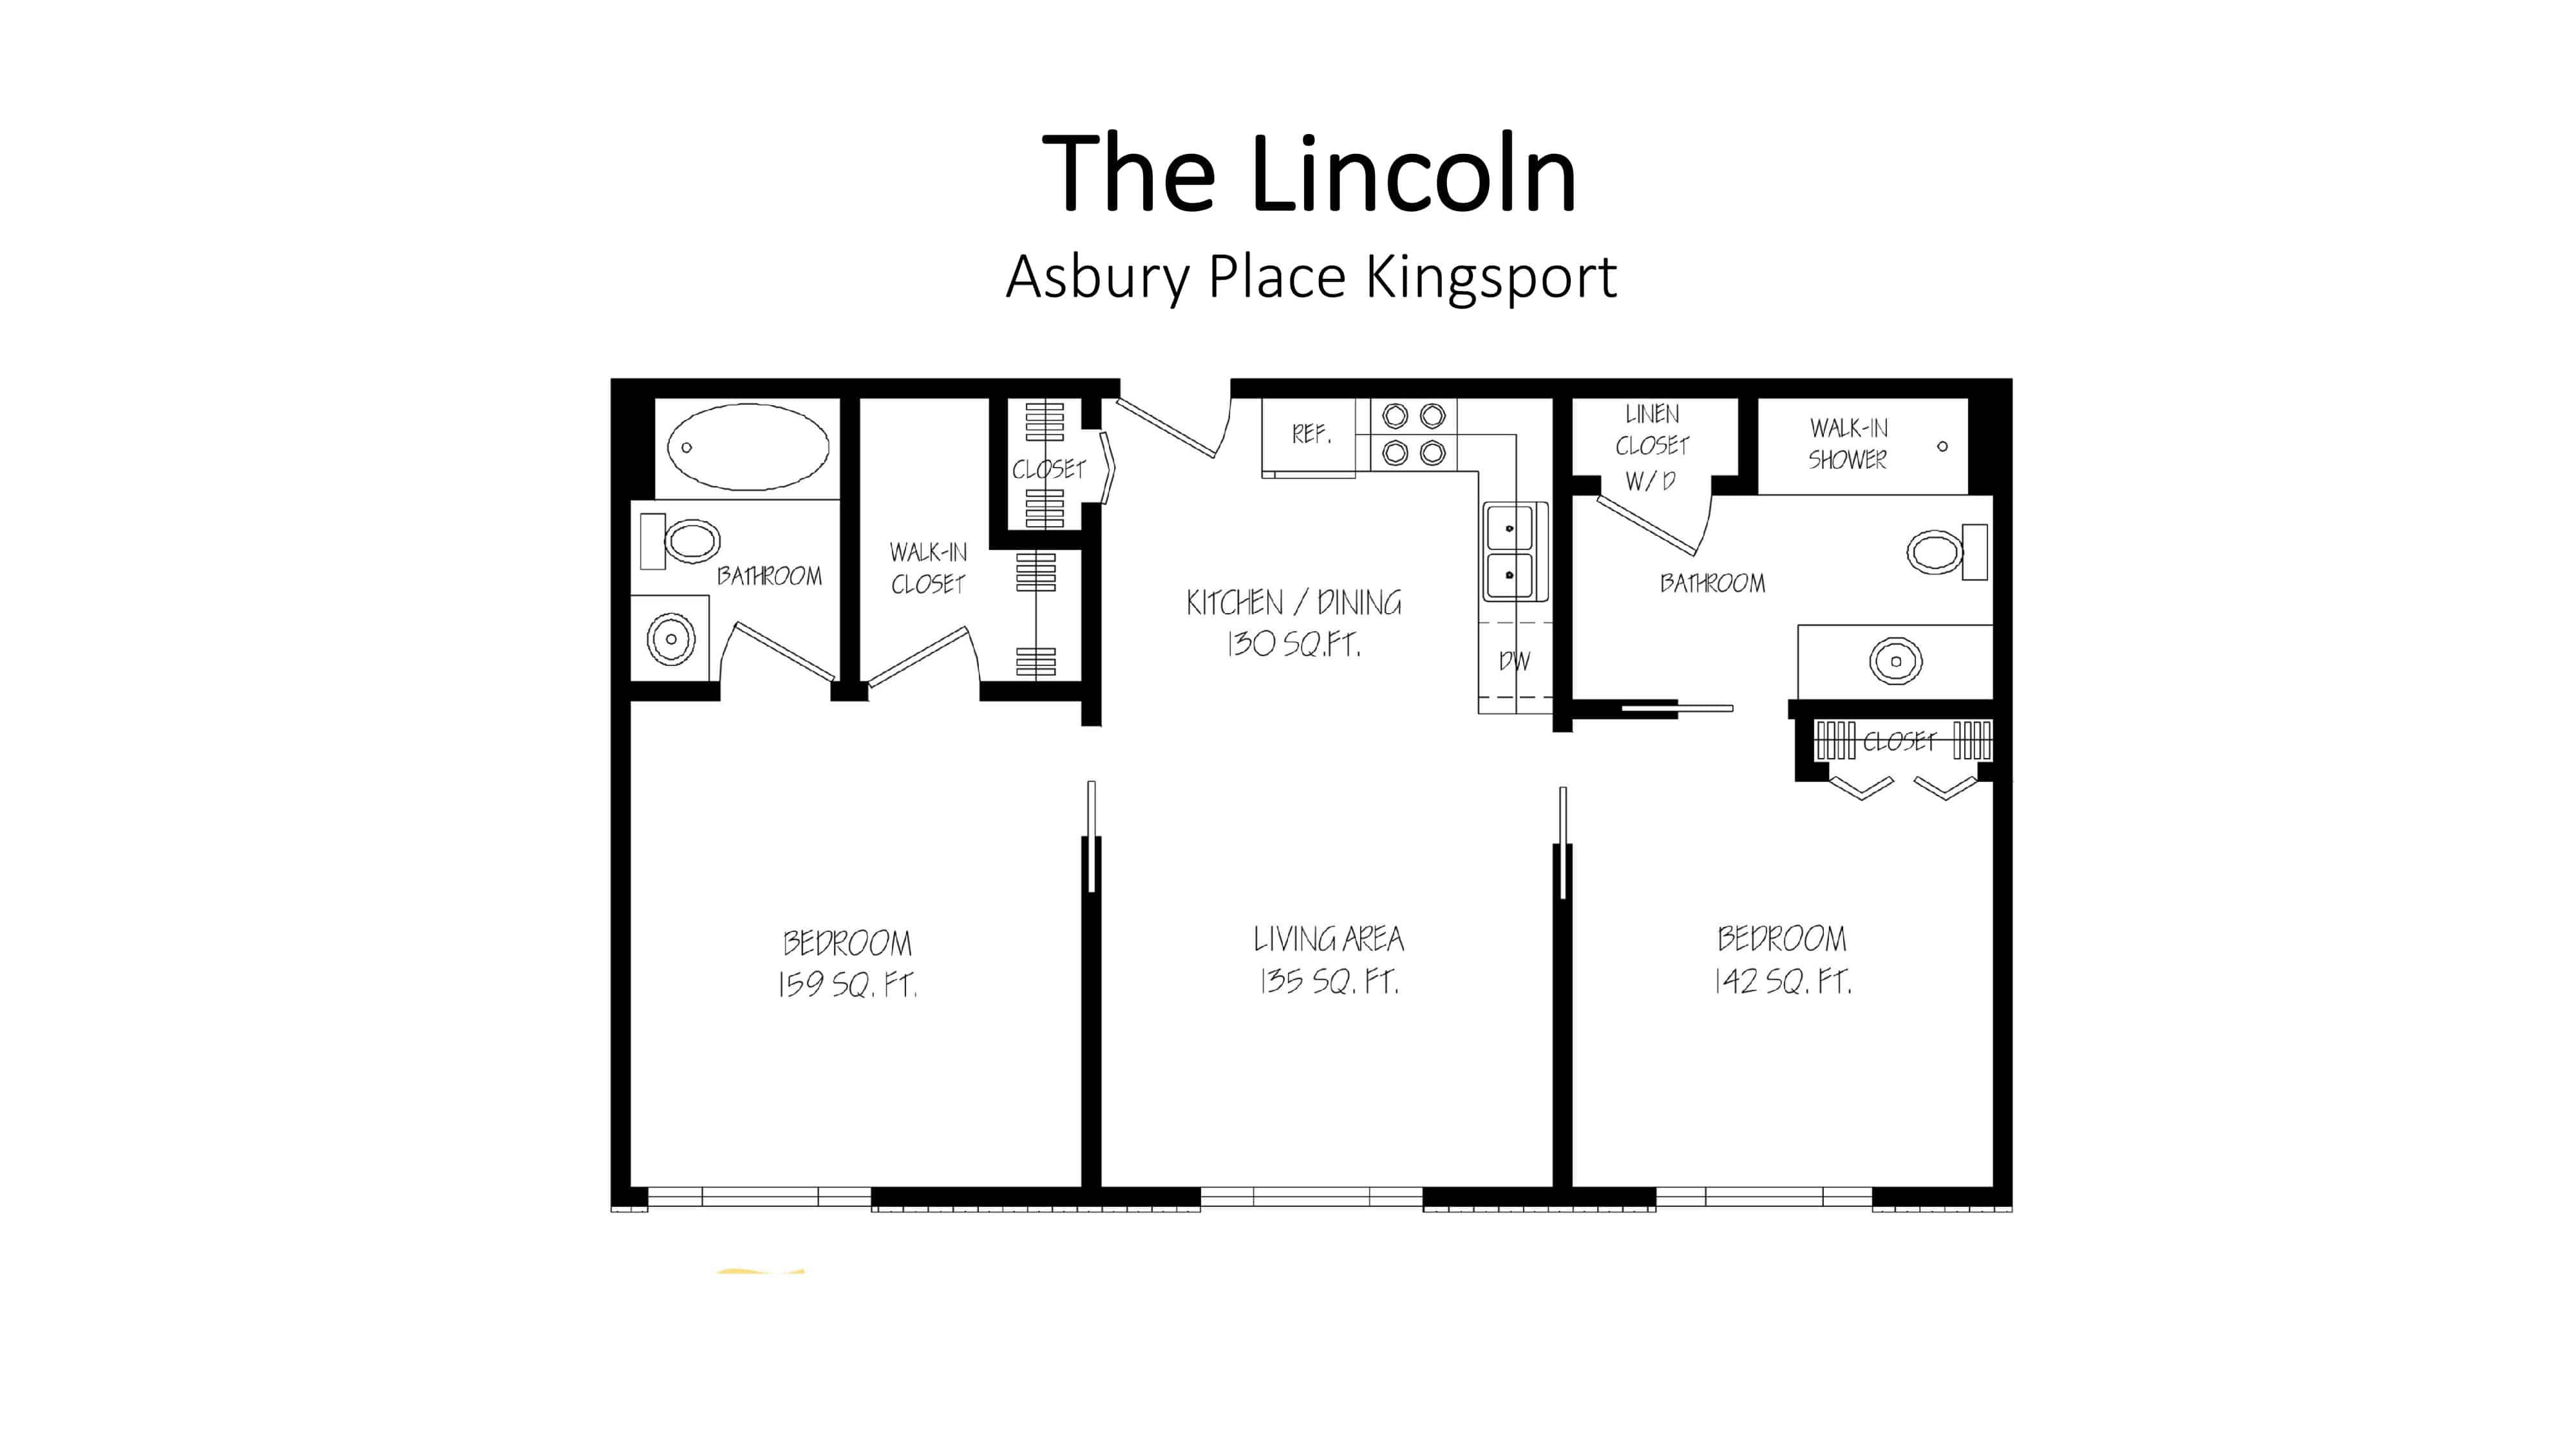 Asbury Place Kingsport The Lincoln Floorplan